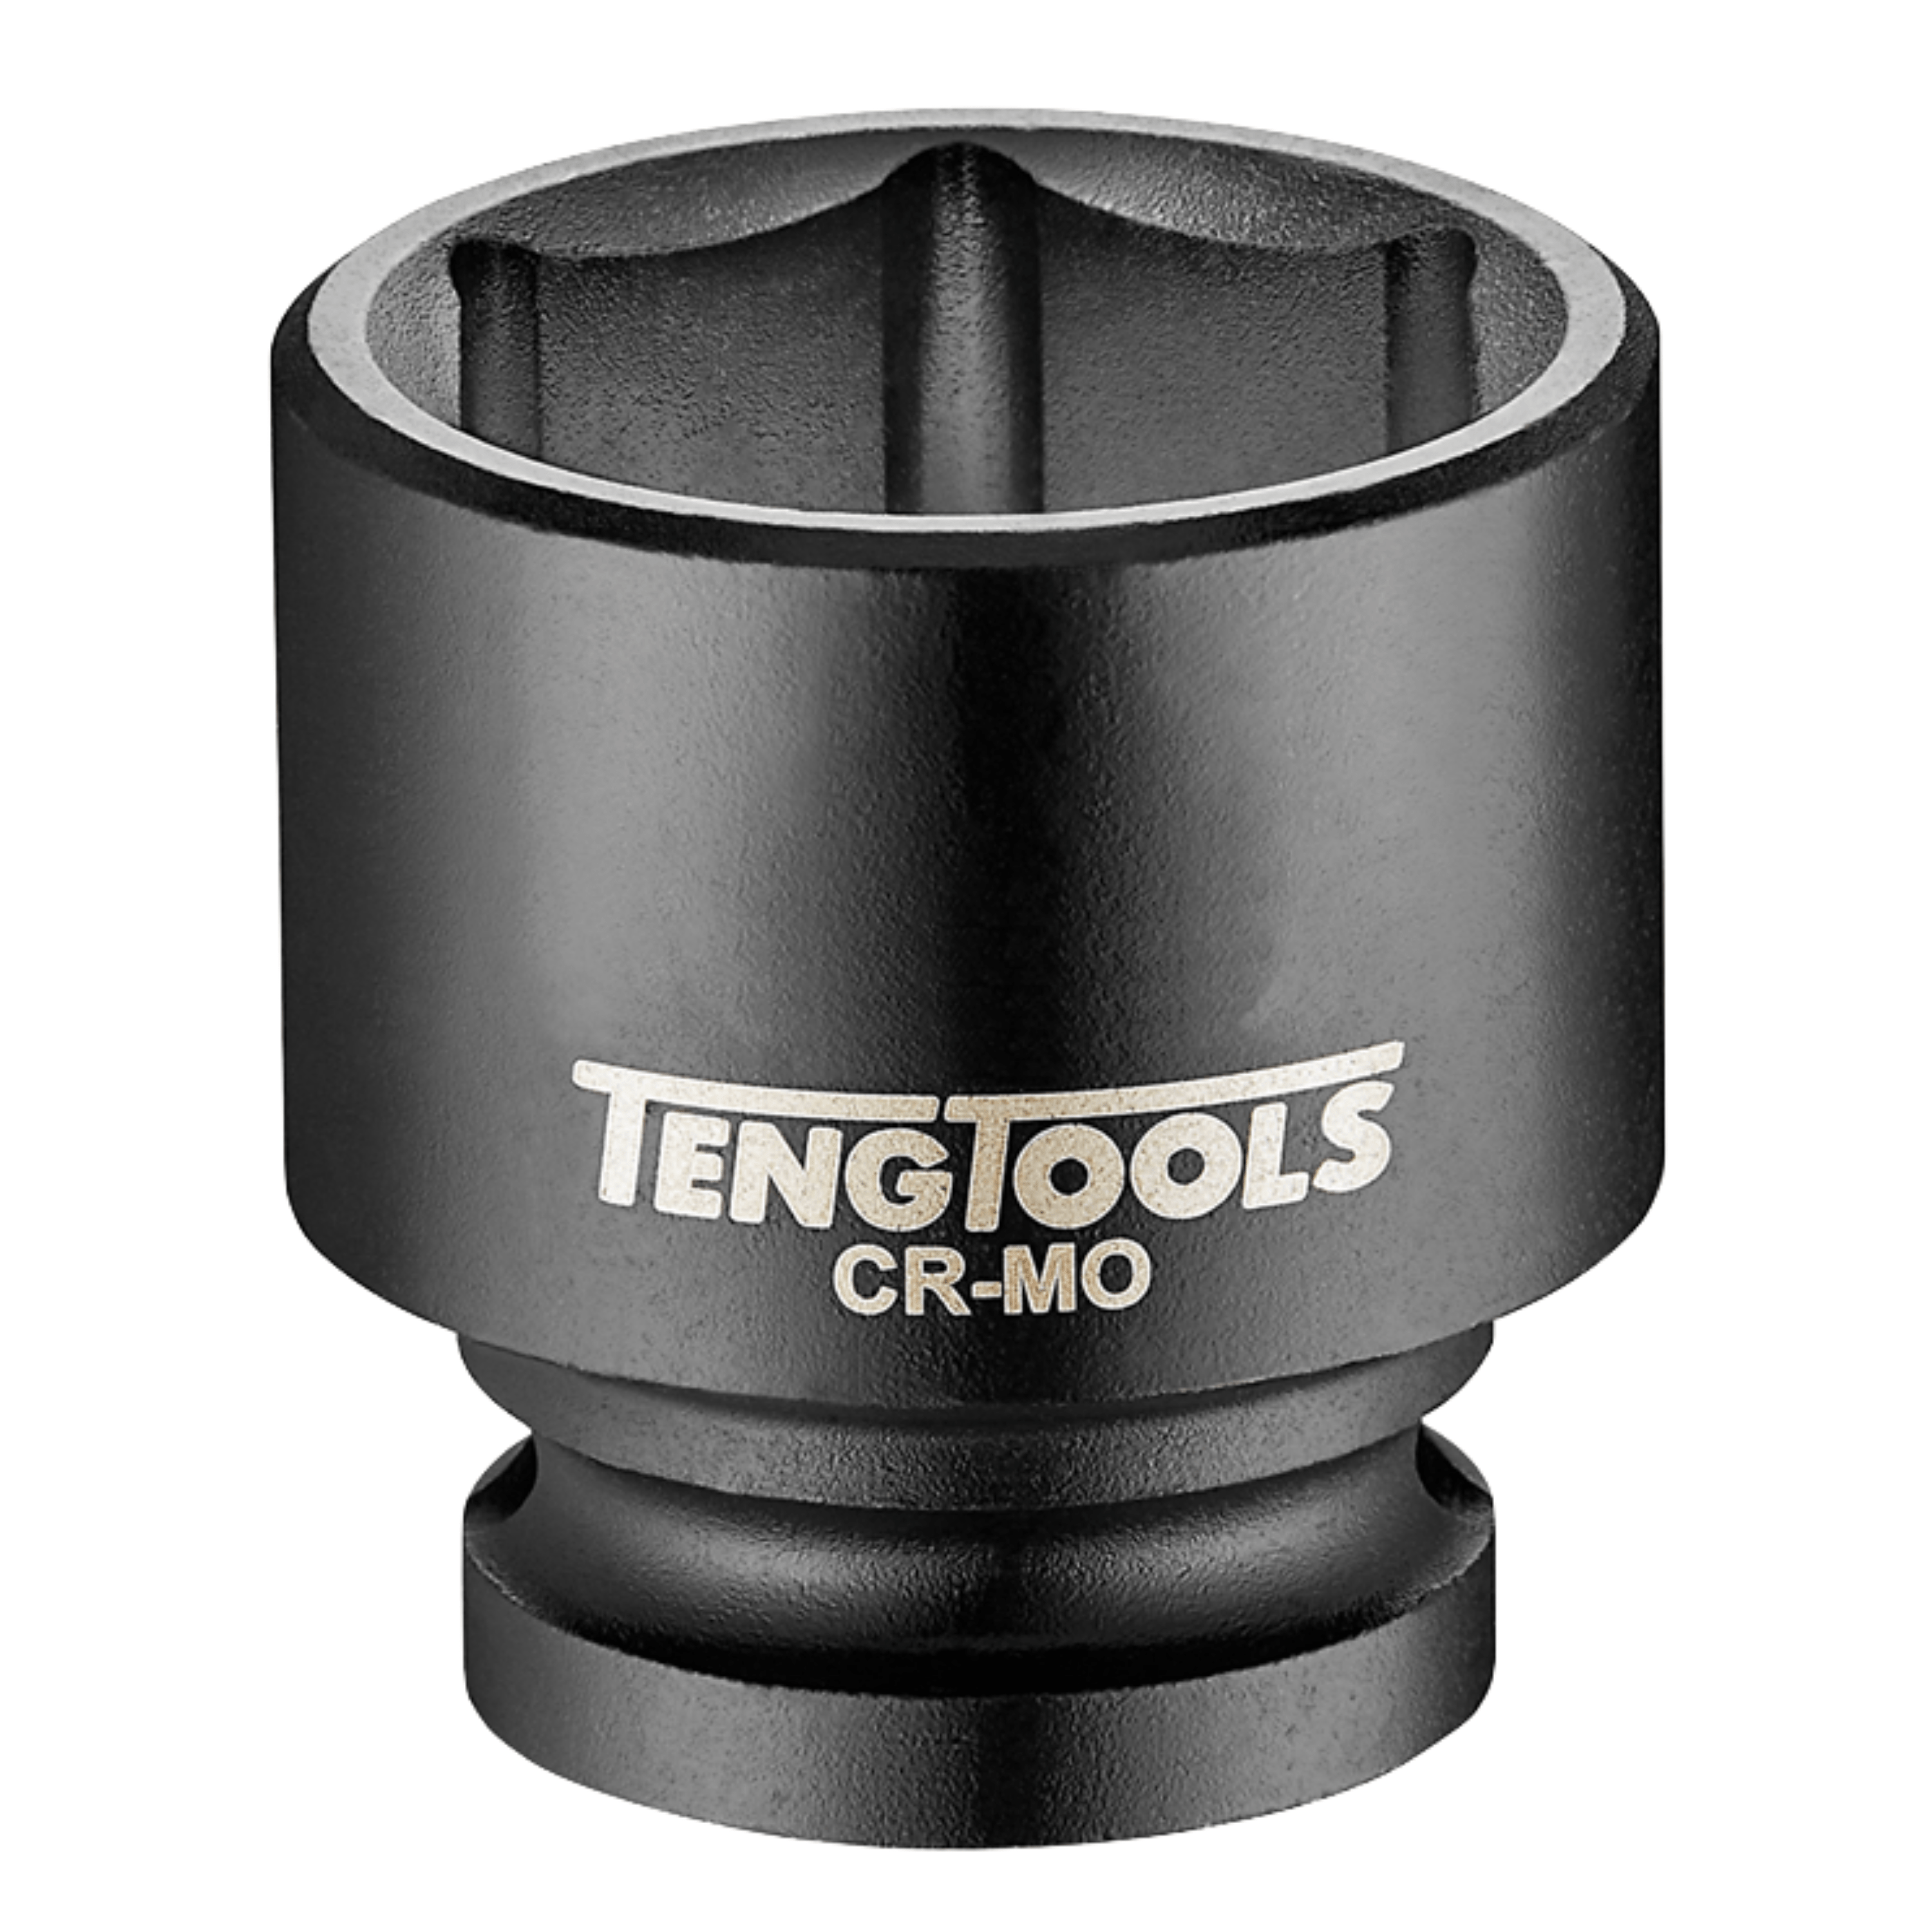 Teng Tools 1-1/2 Inch Drive 6 Point Metric Shallow Chrome Molybdenum Impact Sockets - 65mm